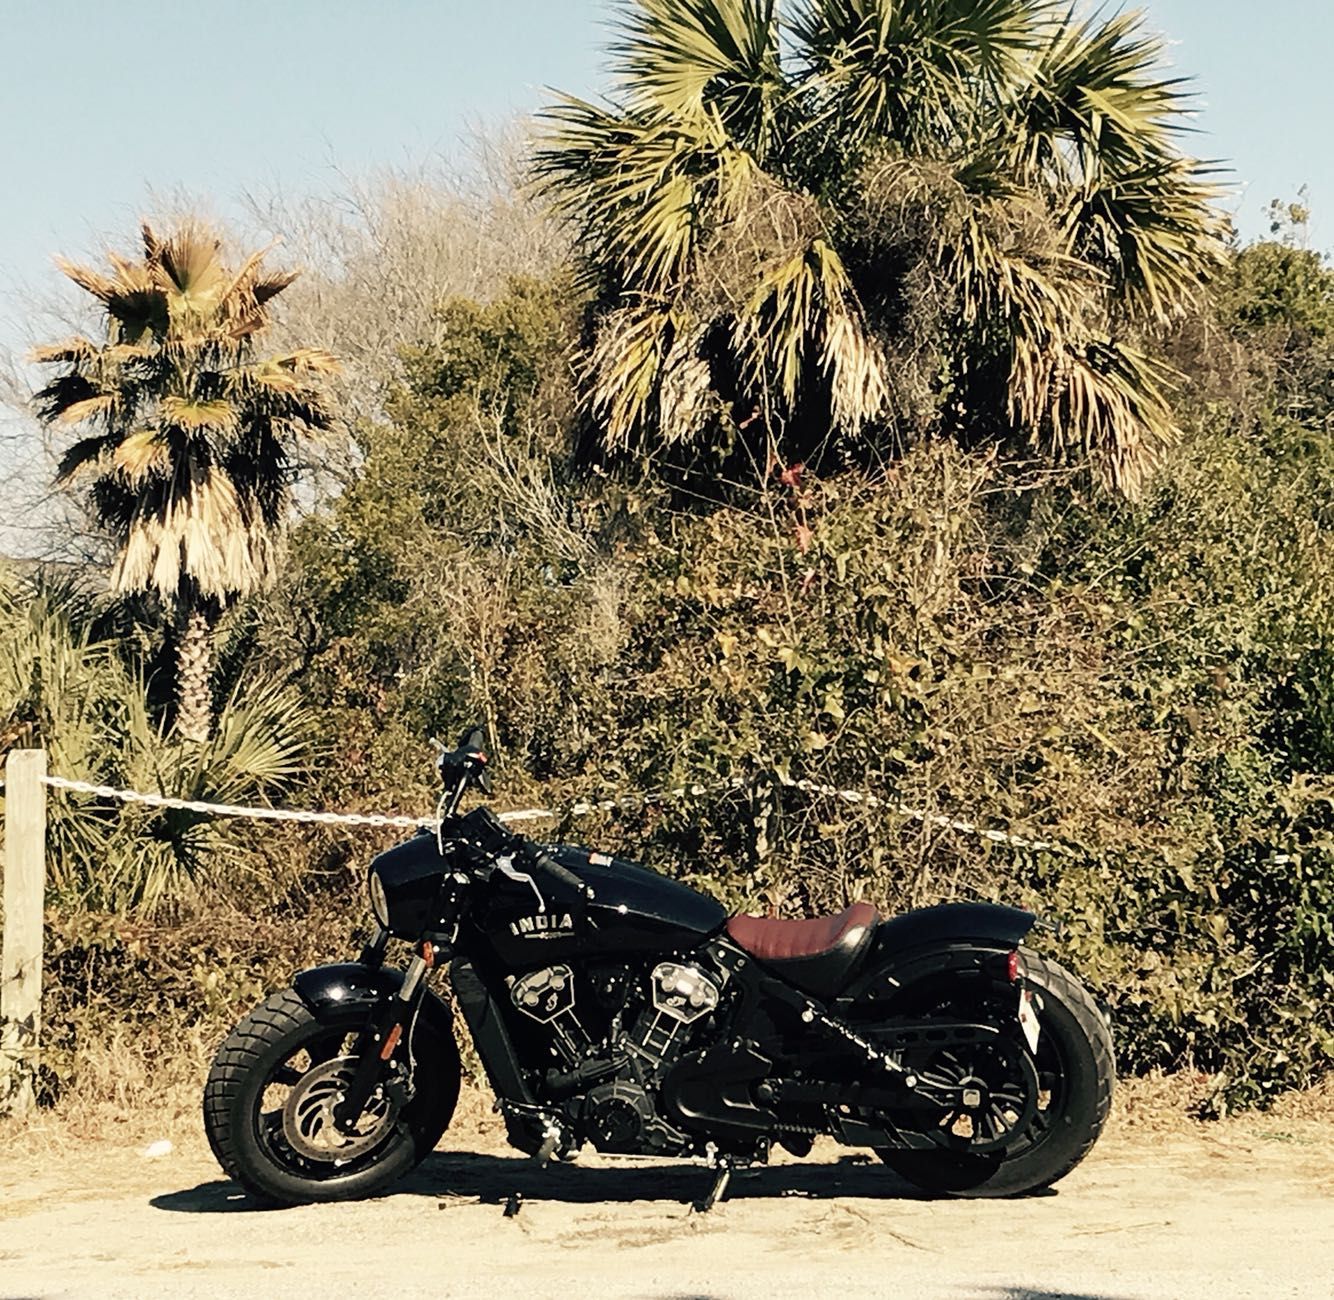 IndianScout97's Image